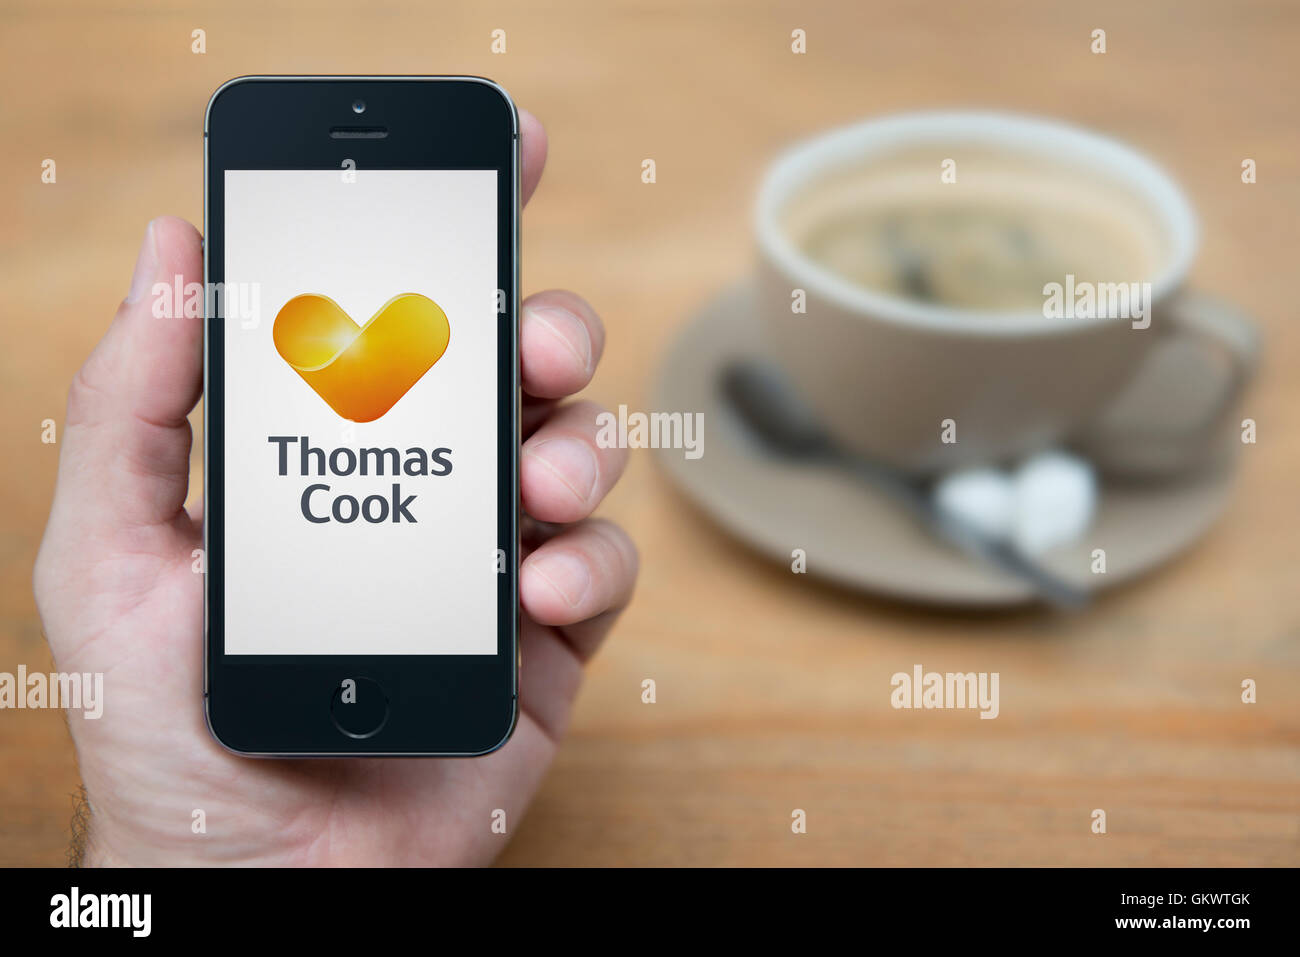 A man looks at his iPhone which displays the Thomas Cook logo, while sat with a cup of coffee (Editorial use only). Stock Photo